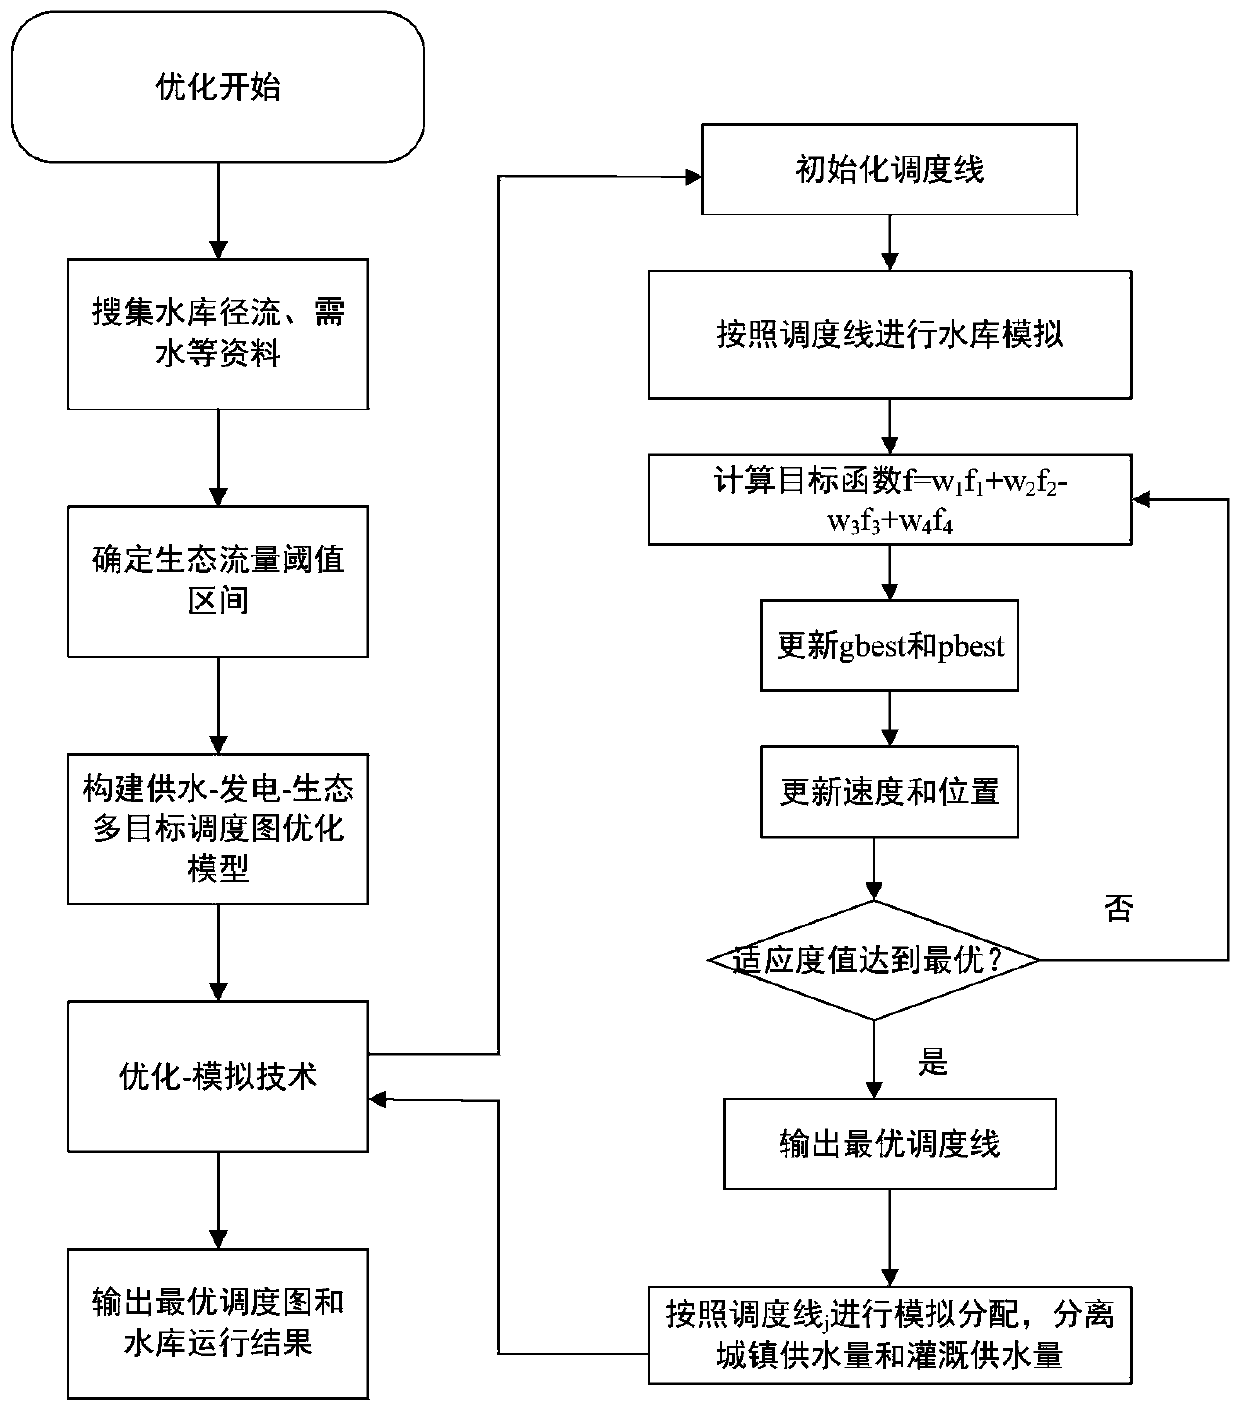 Water supply-power generation-ecological multi-objective scheduling graph optimization method based on ecological flow